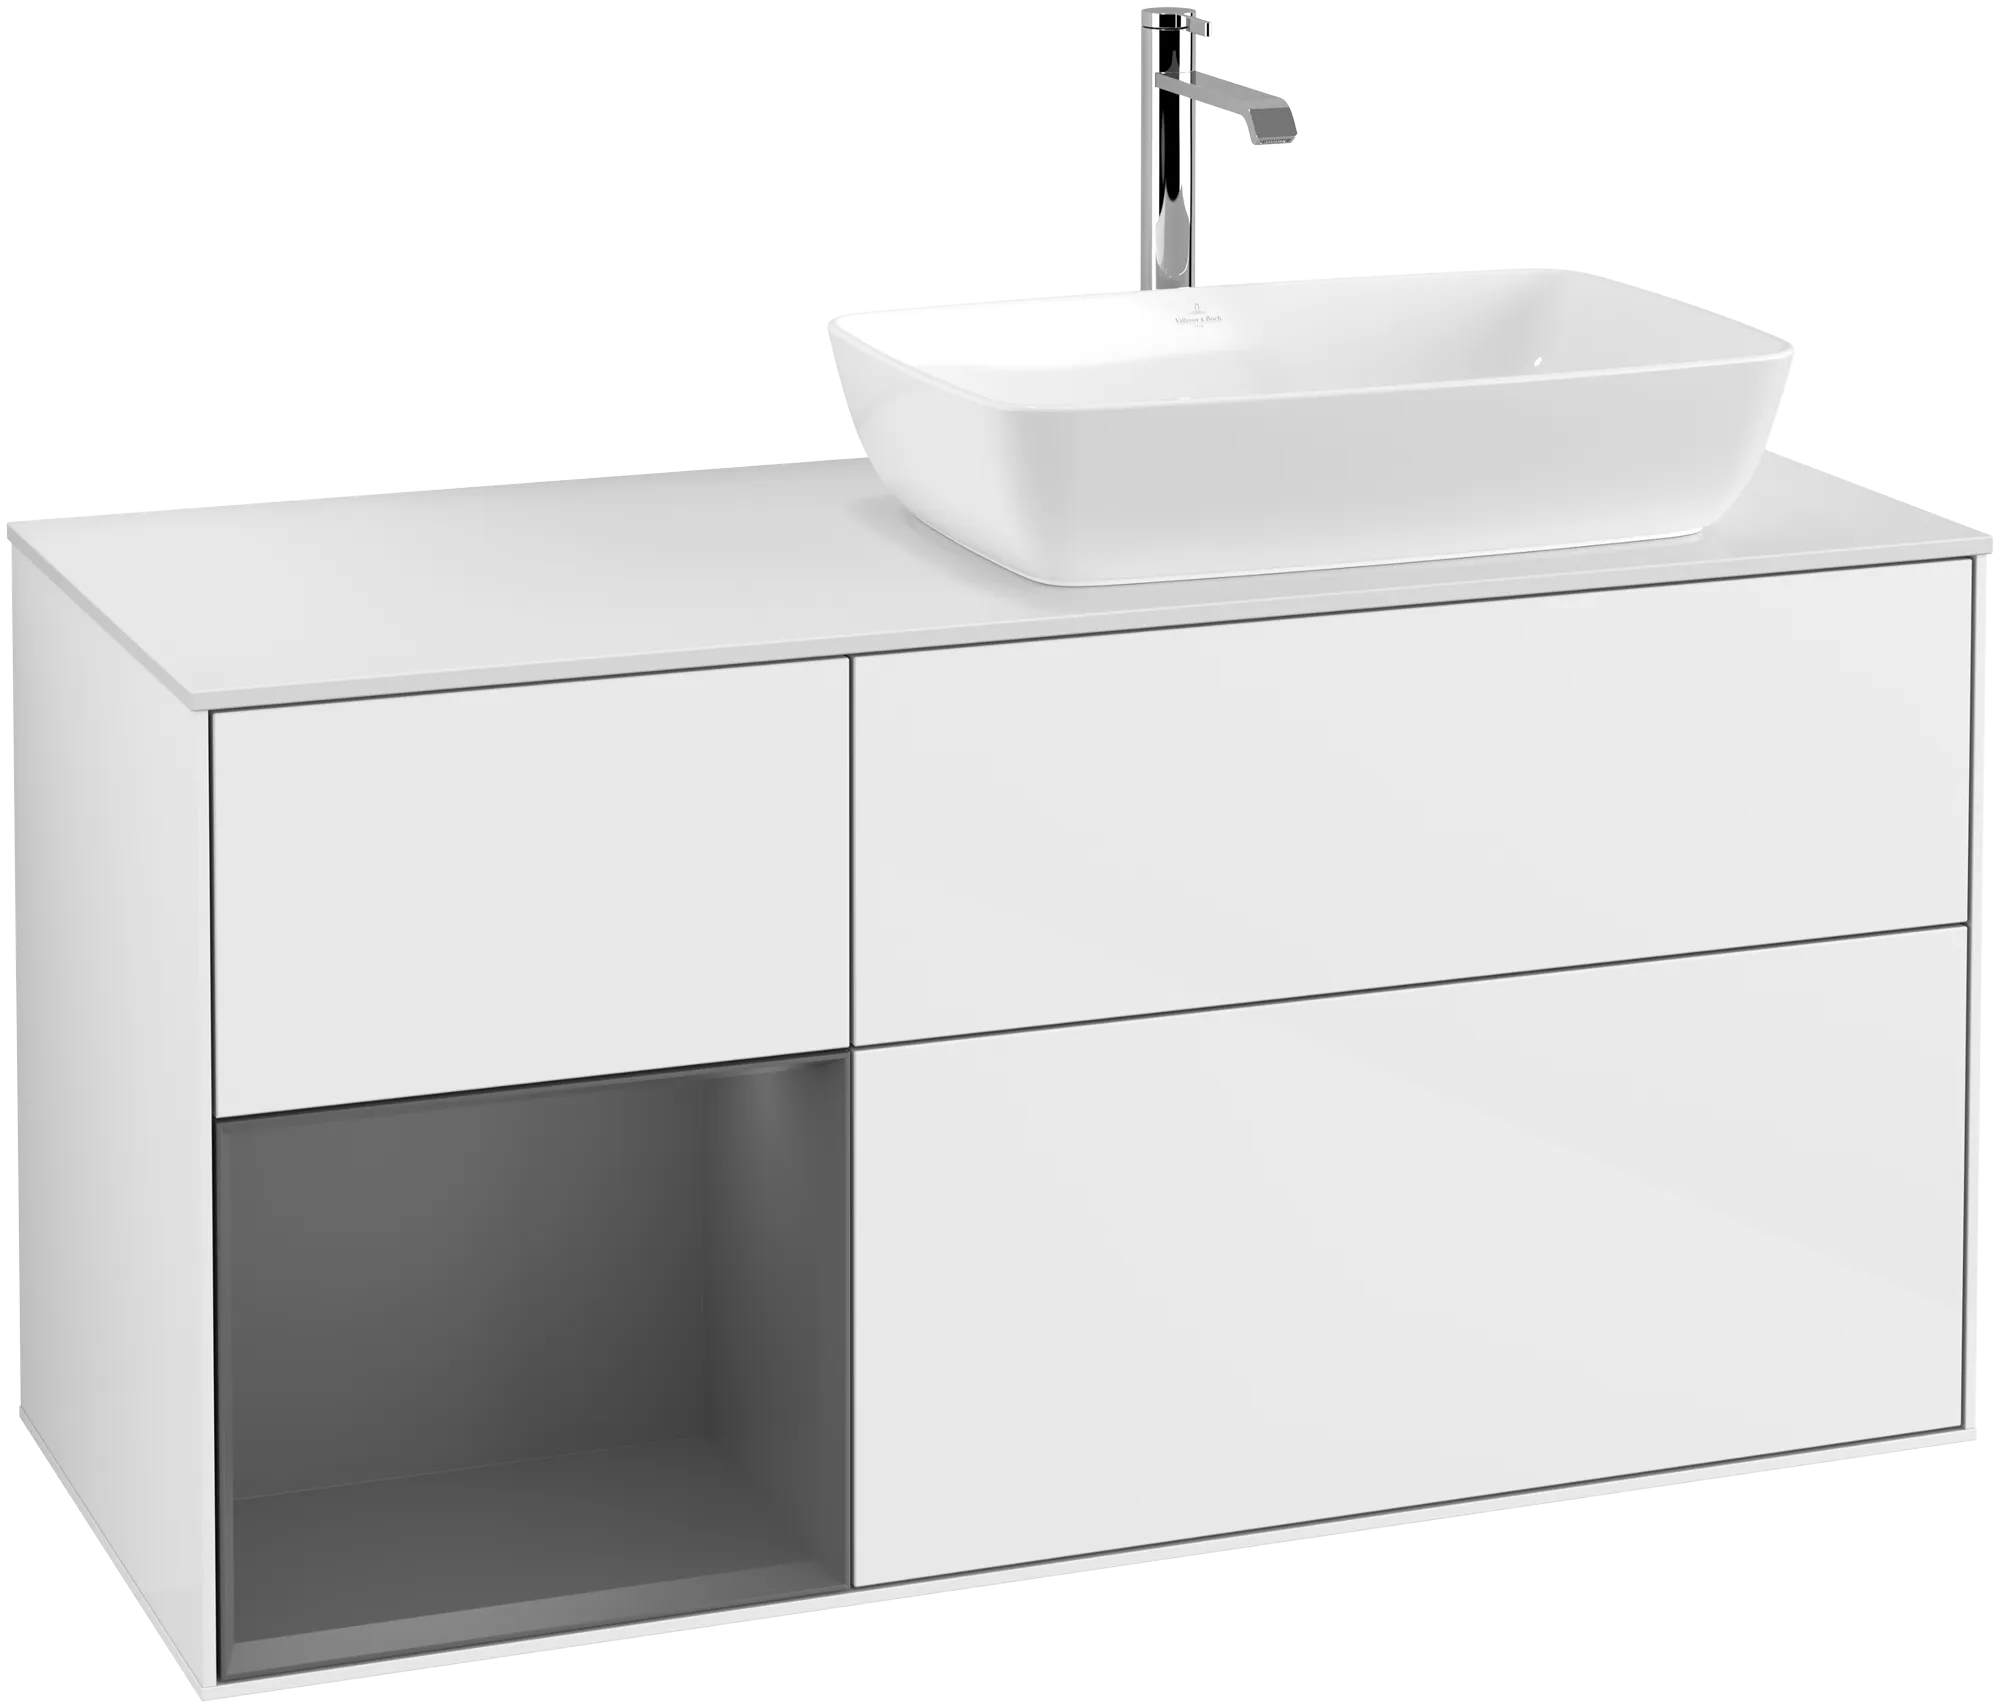 VILLEROY BOCH Finion Vanity unit, with lighting, 3 pull-out compartments, 1200 x 603 x 501 mm, Glossy White Lacquer / Anthracite Matt Lacquer / Glass White Matt #G801GKGF resmi